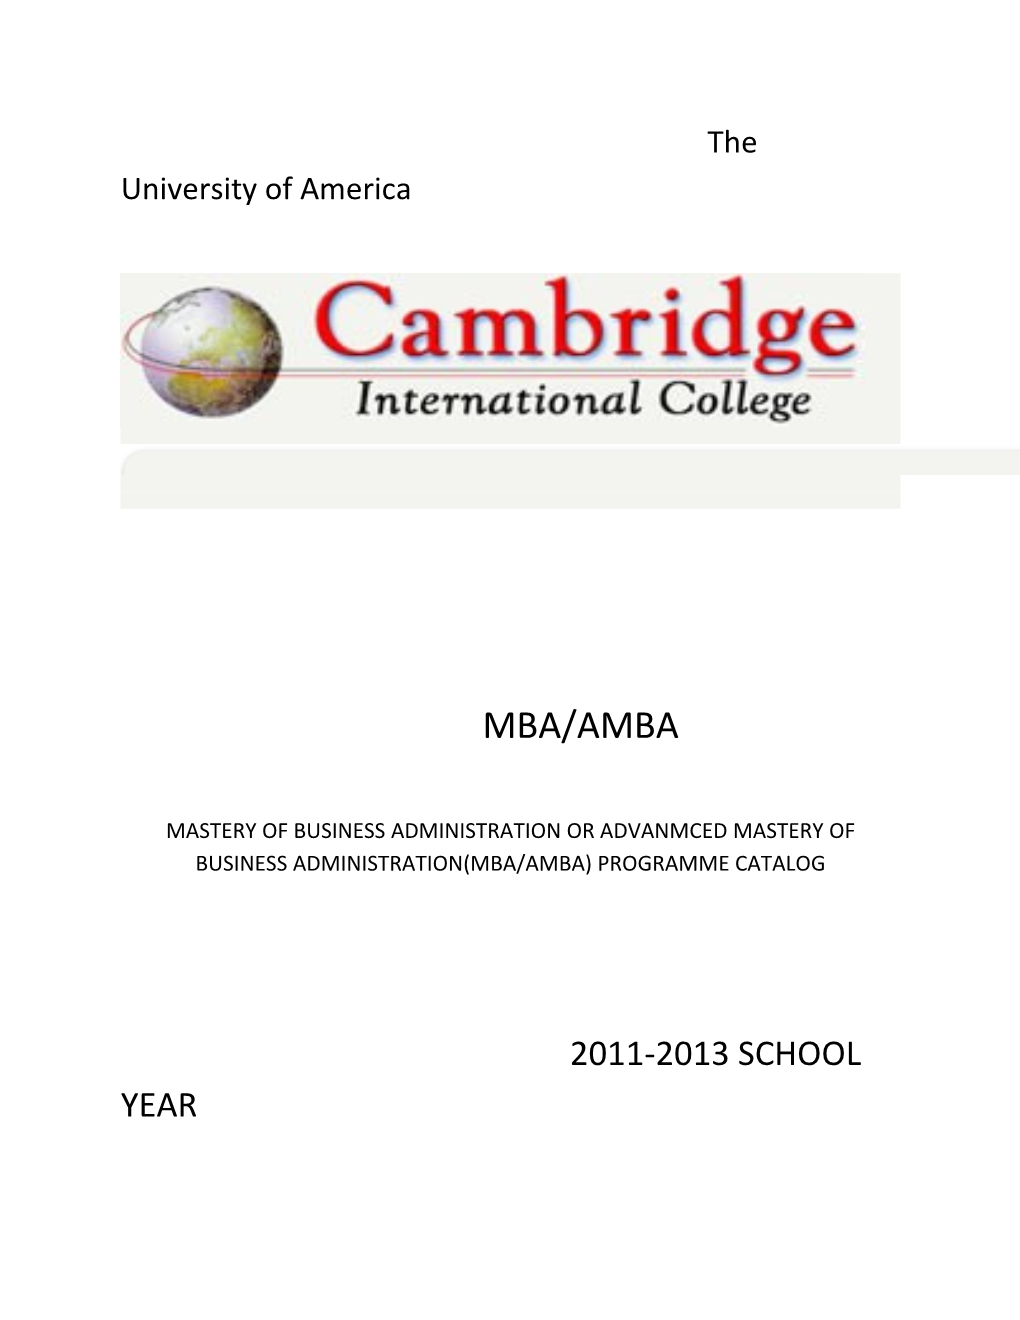 Mastery of Business Administration Or Advanmced Mastery of Business Administration(Mba/Amba)